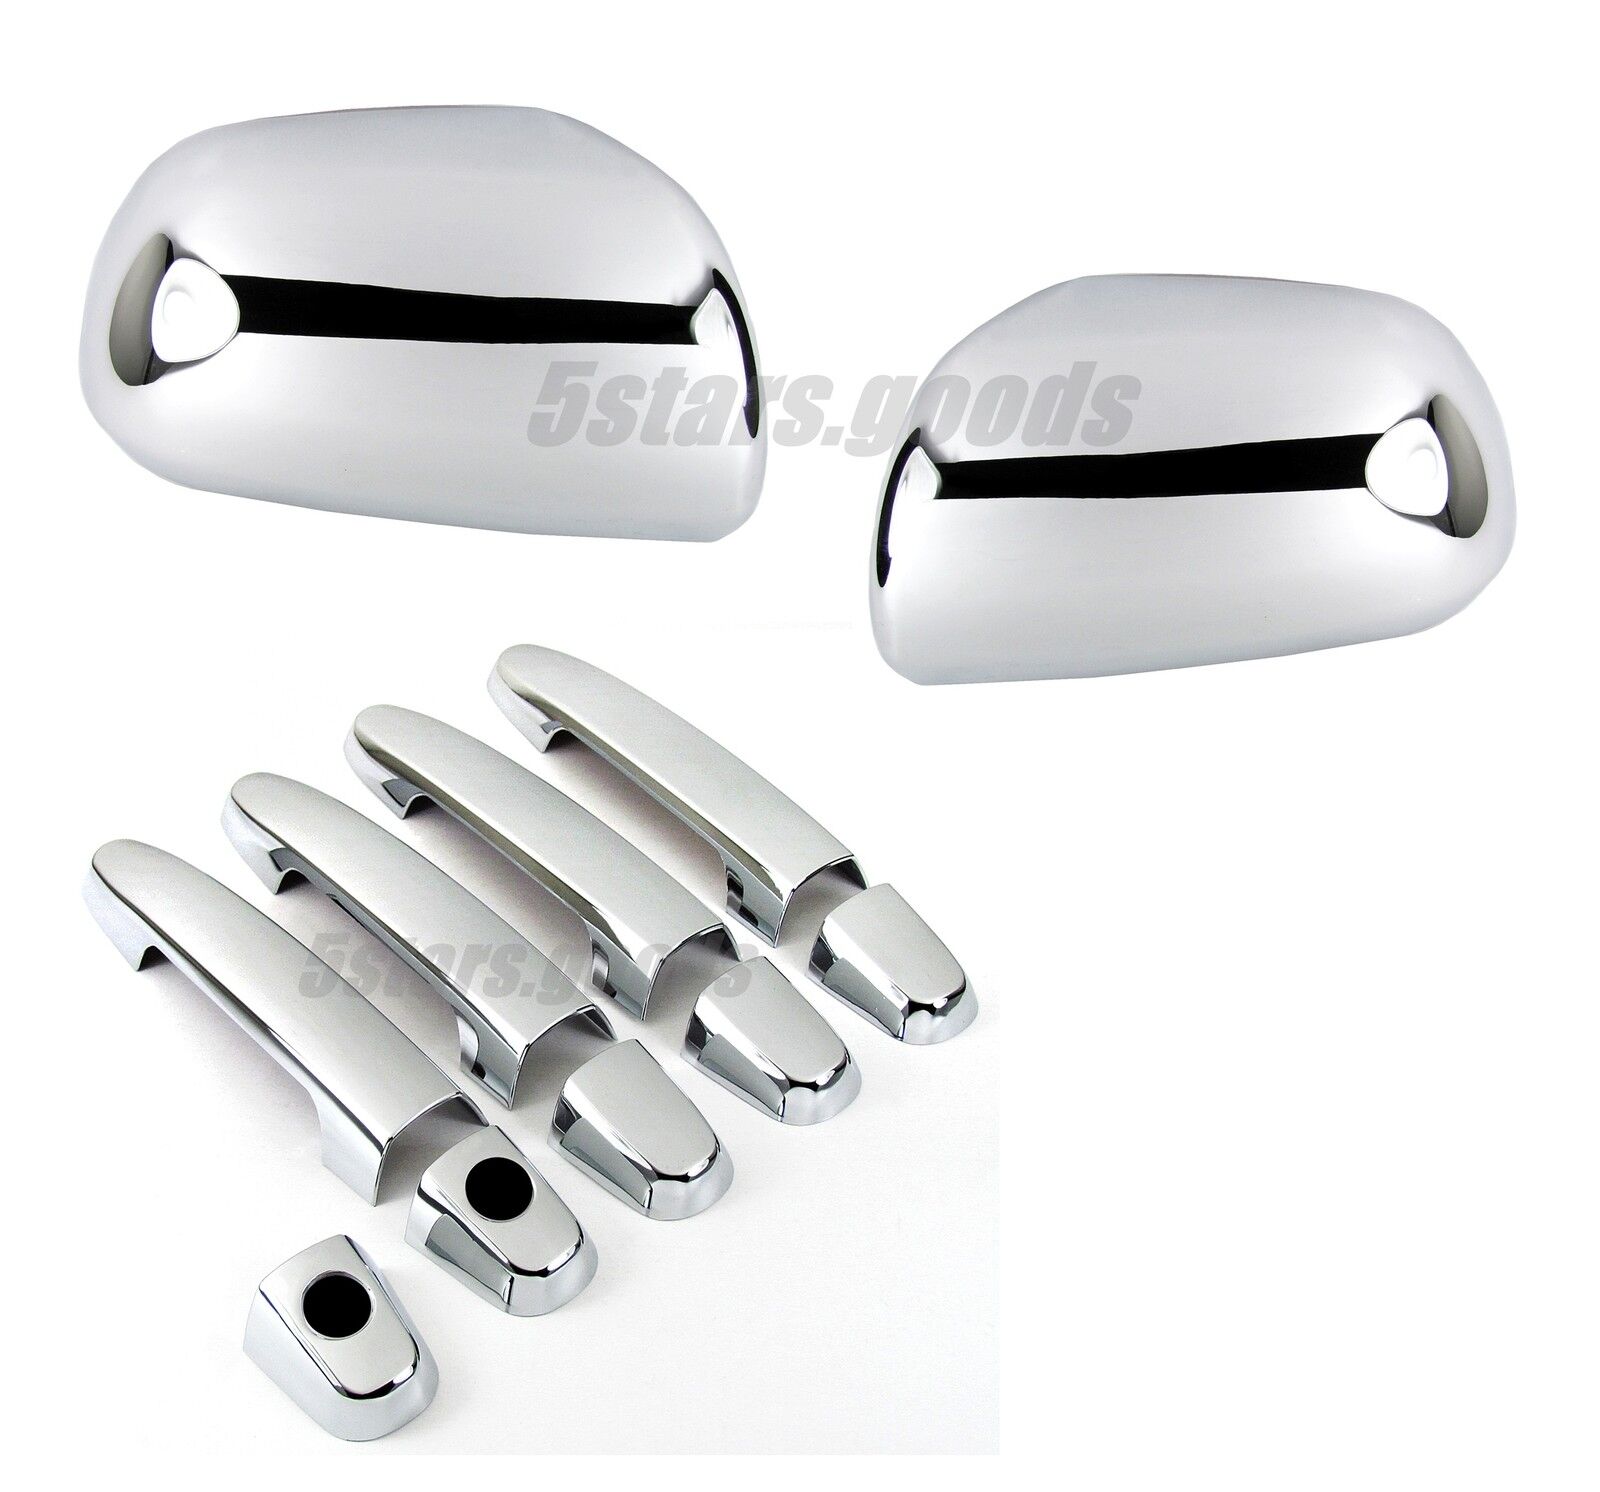 Accessories Chrome Side Mirror + Door Handle Covers For Toyota Yaris 2007-2011